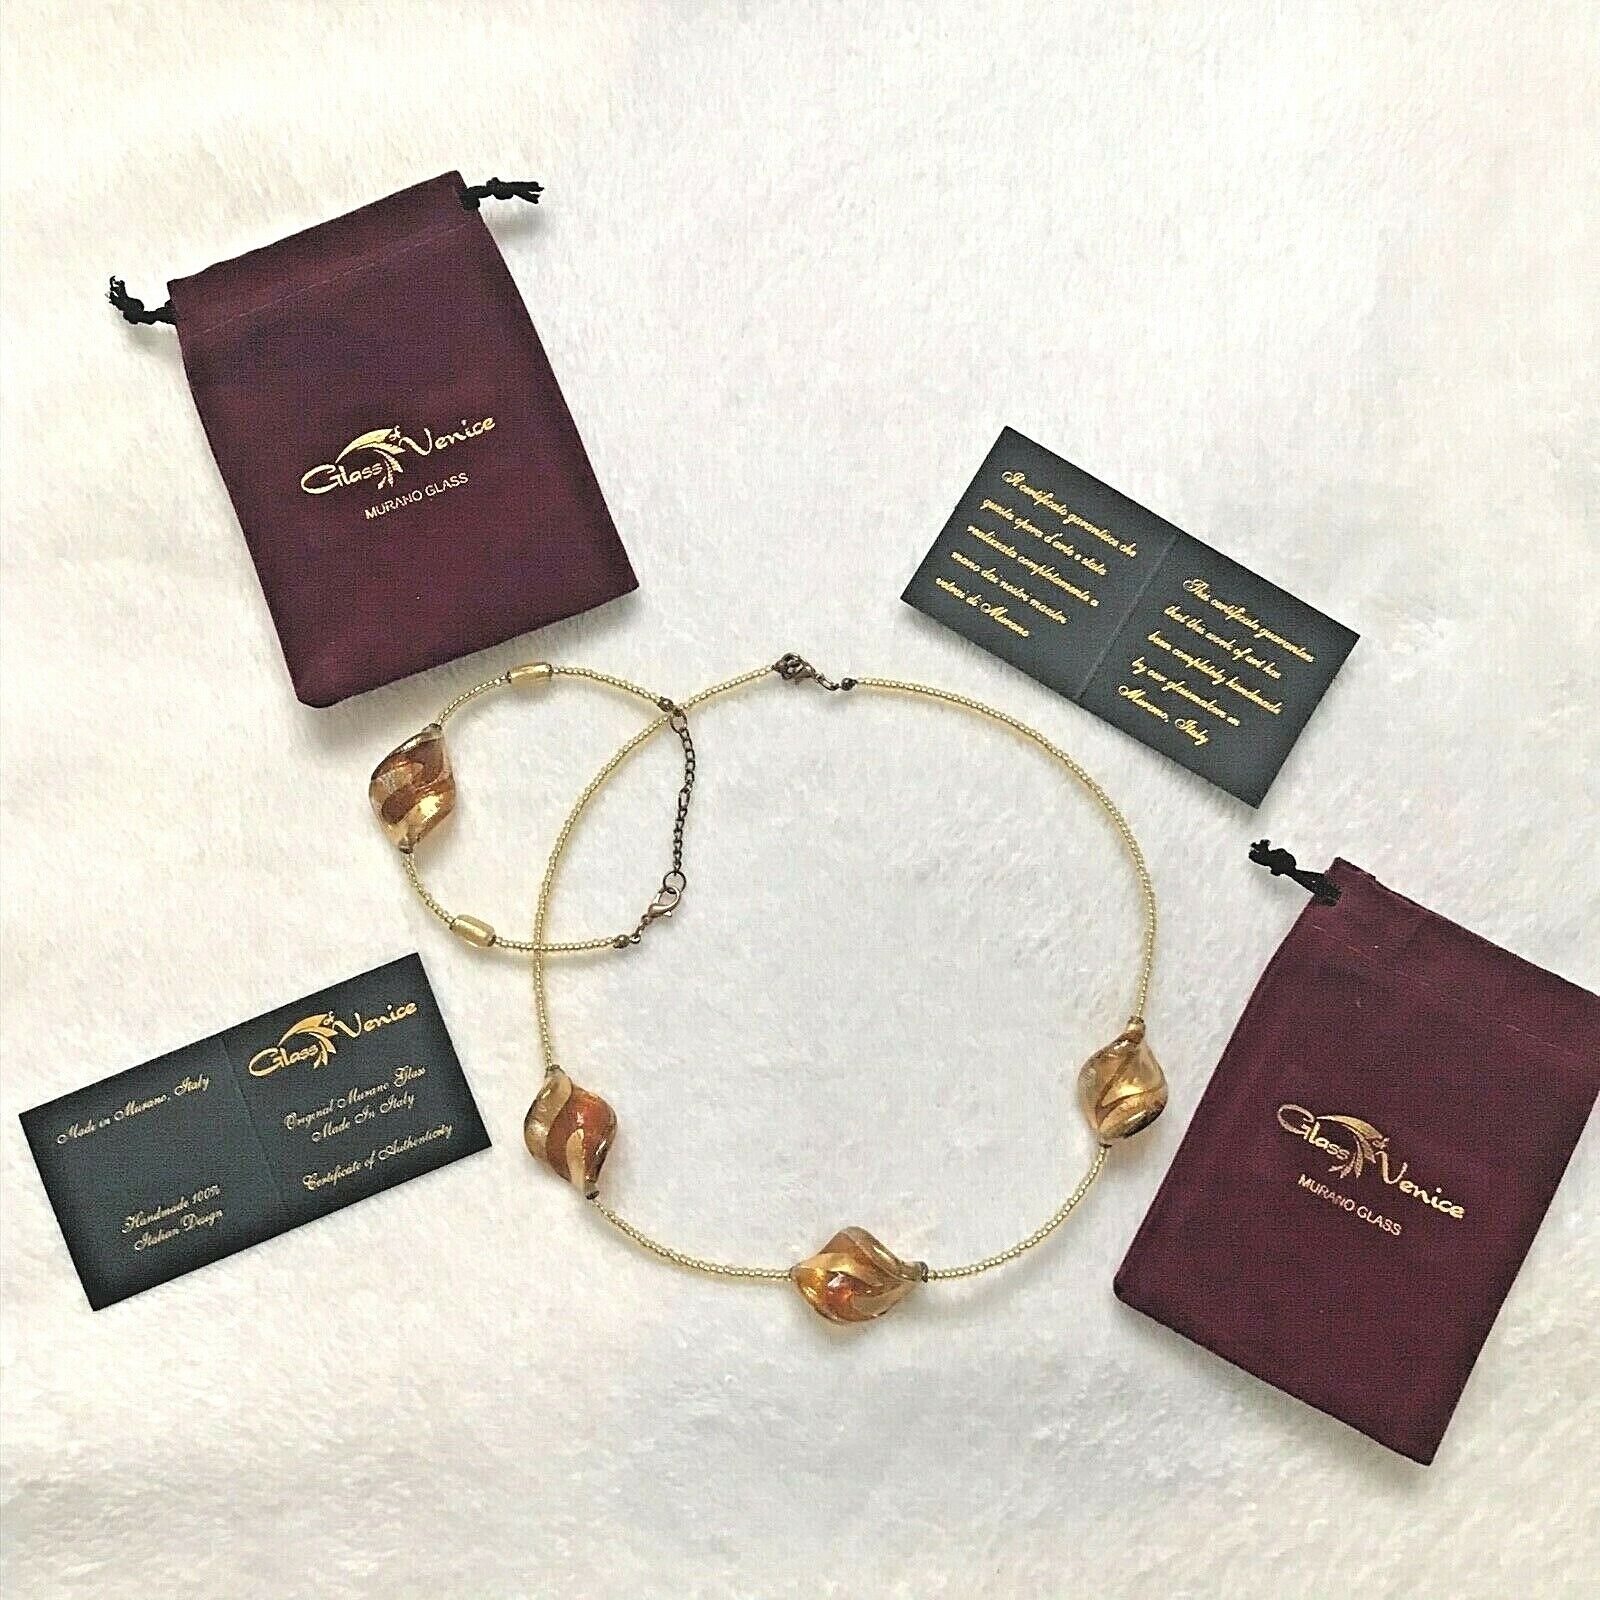 Glass Of Venice Royal Cognac Spirals Necklace And Bracelet Set Made In Italy